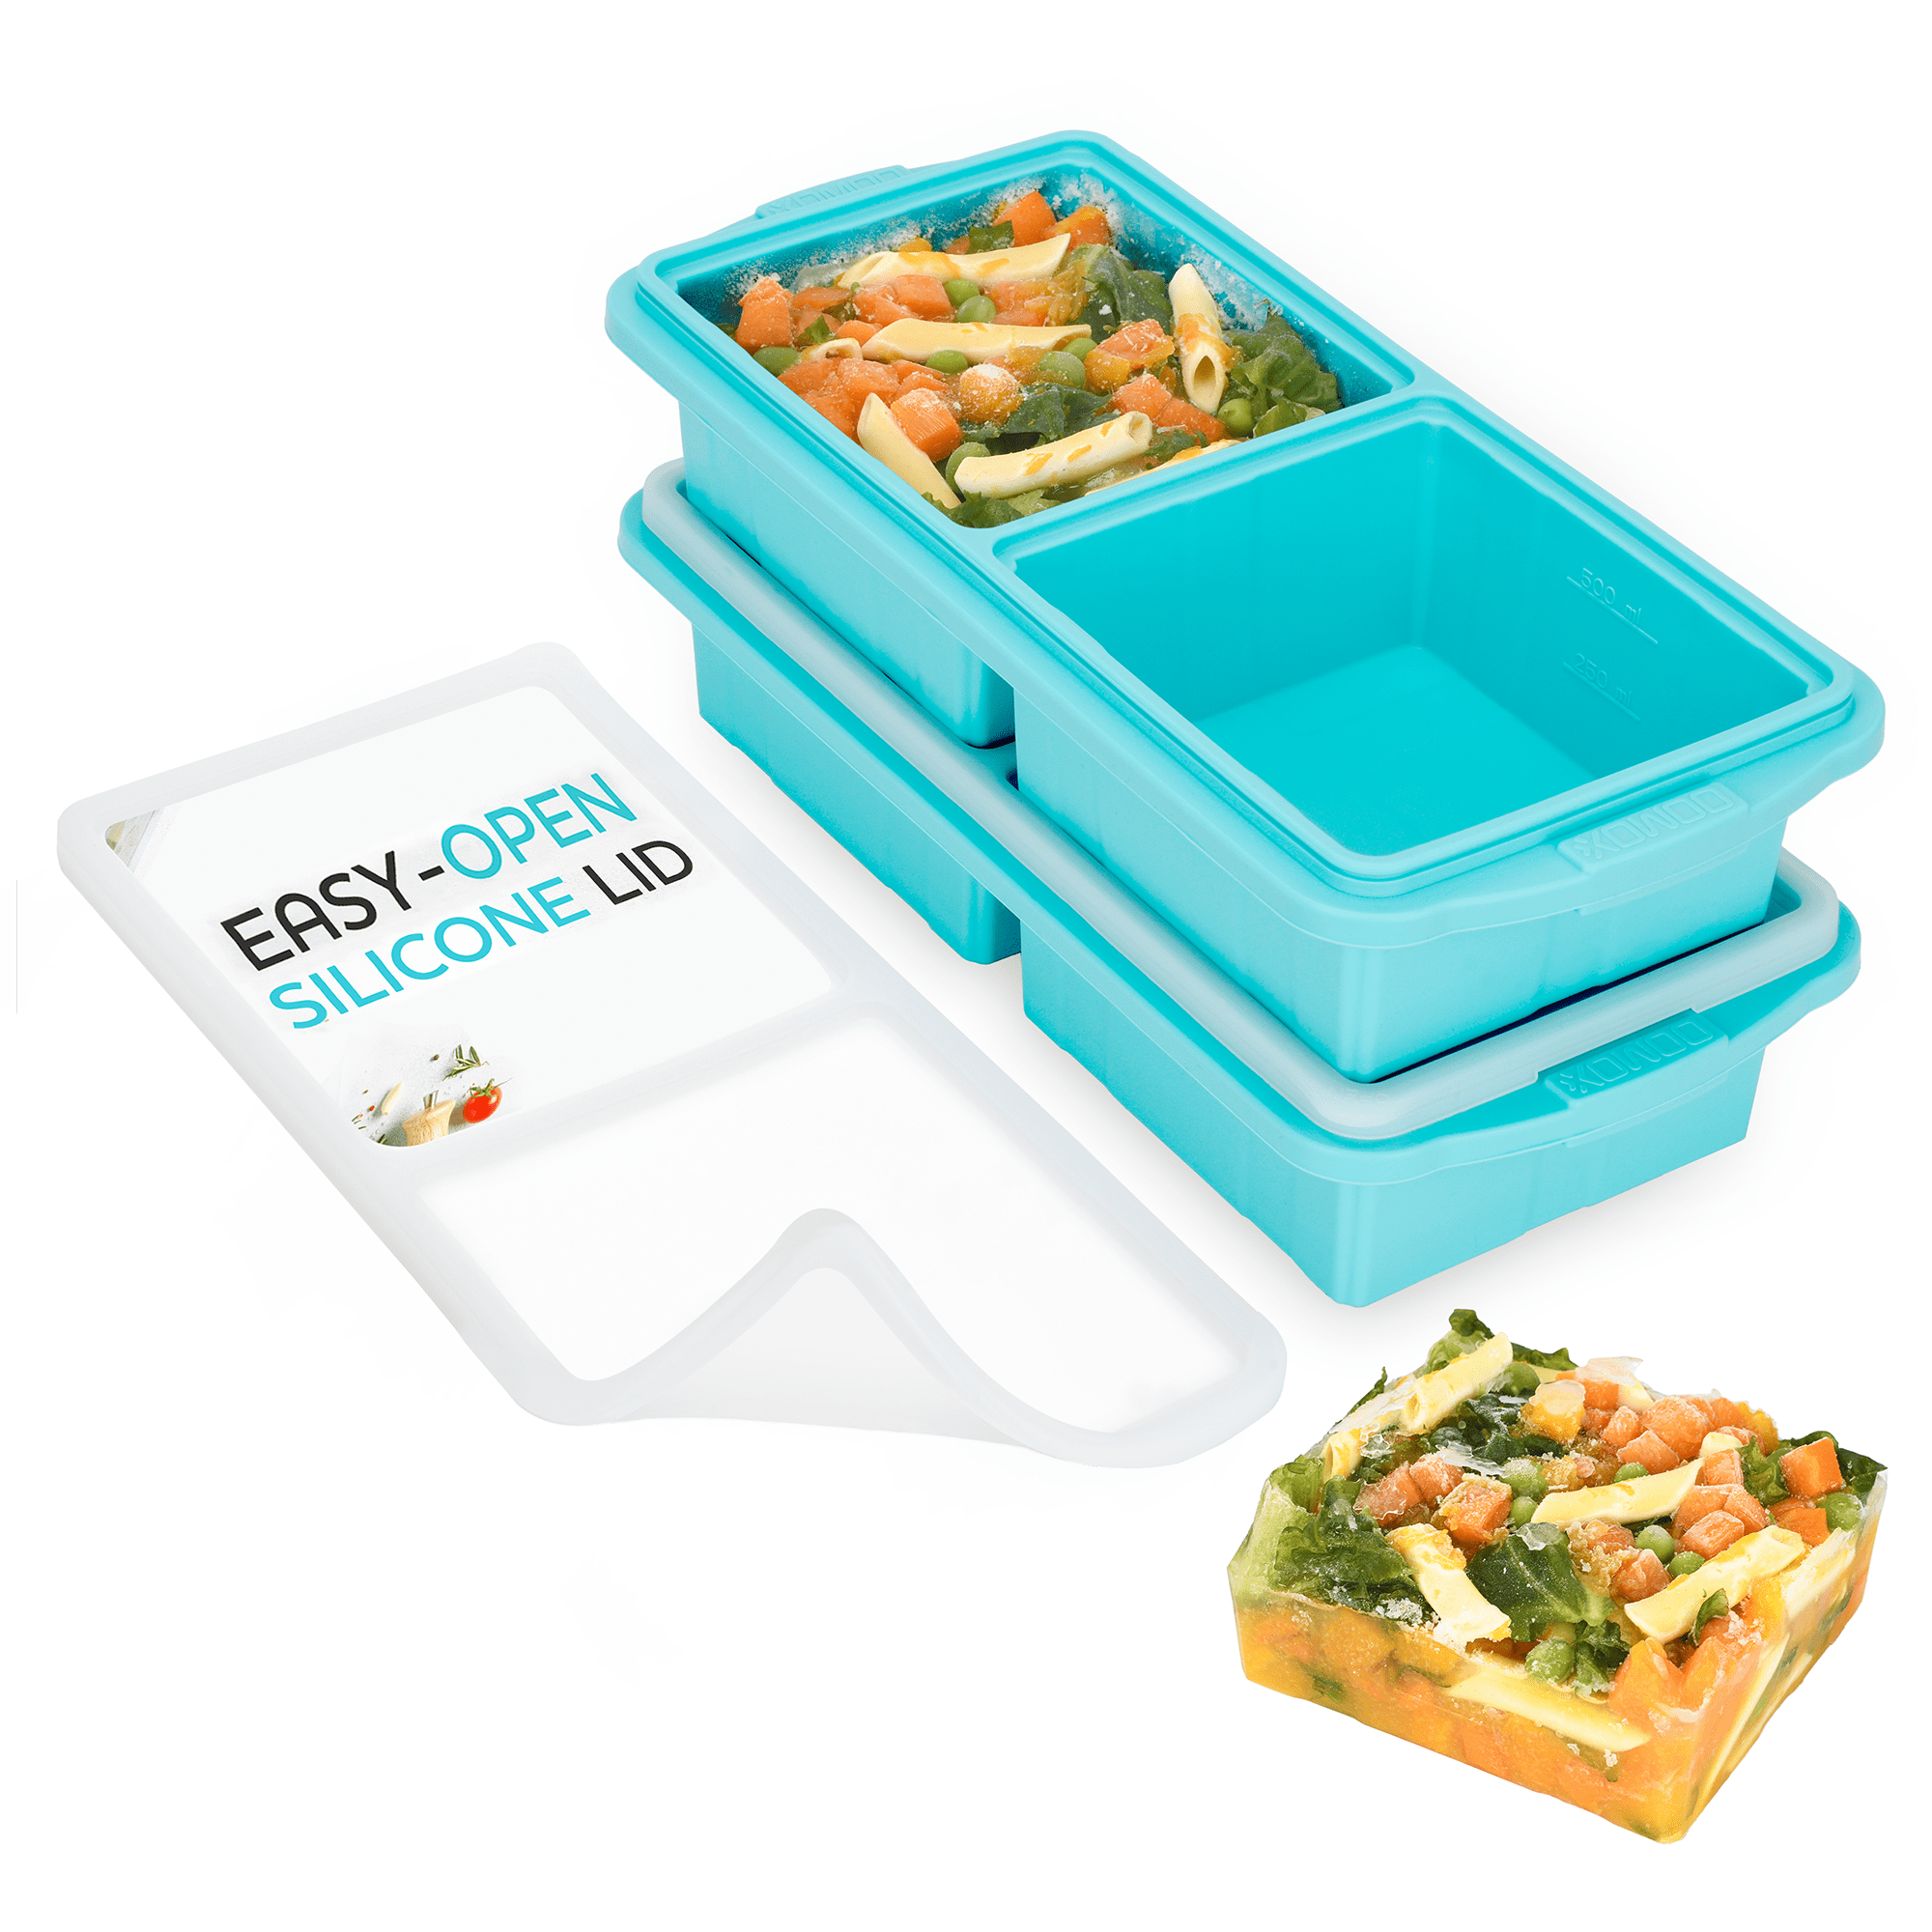 1-Cup Extra Large Silicone Freezing Tray With Lid,Silicone Soup Freezer  Molds,Silicone Freezer Container,Freeze & Store Soup, Broth, Sauce,  Leftovers - Makes 4 Perfect 1 Cup Portions